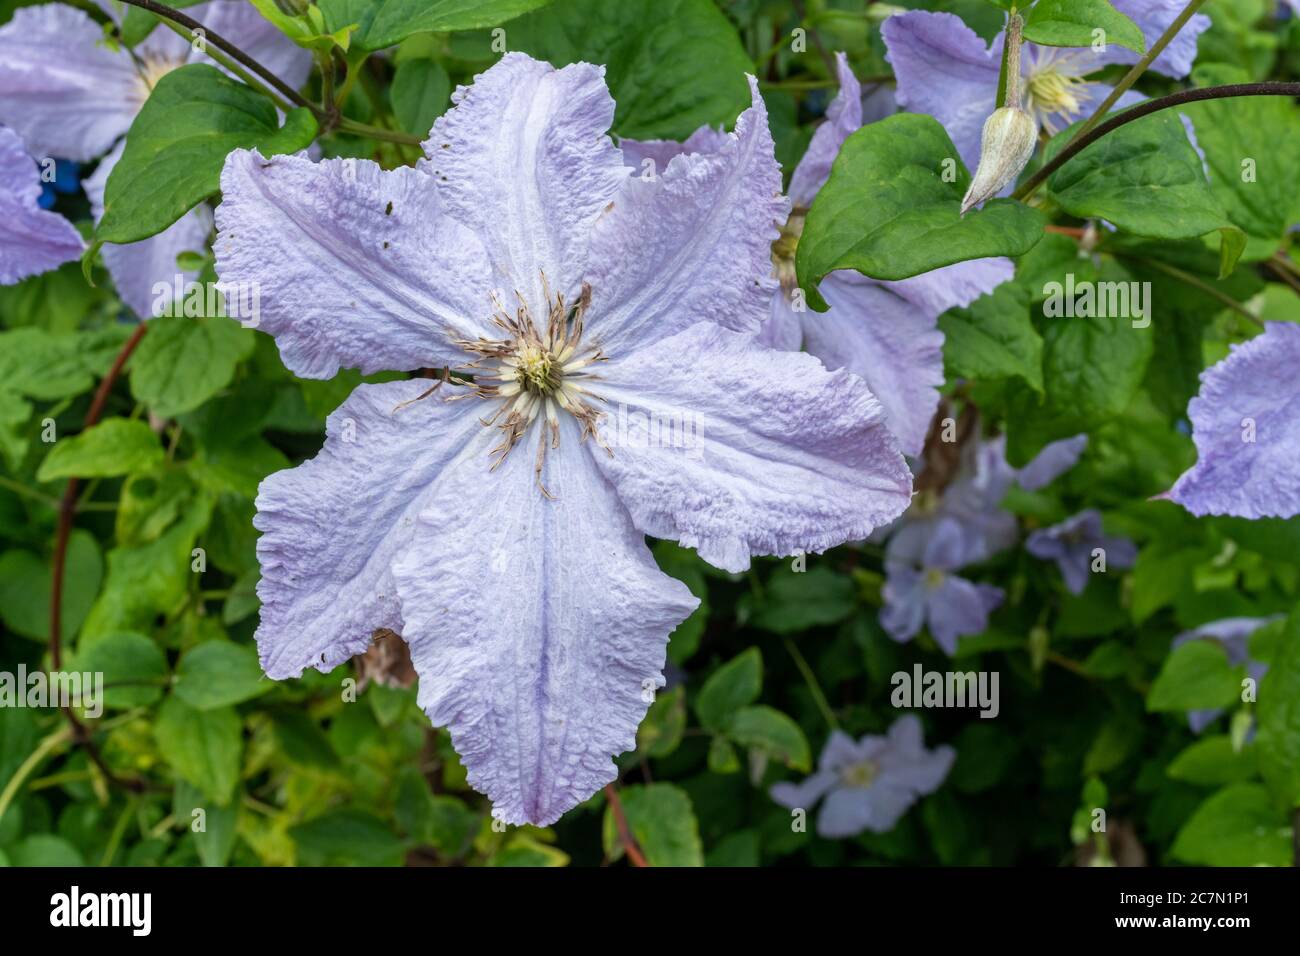 Clematis blue angel (blekitny aniol) flowers, close-up of pale mauve flower, UK, July Stock Photo